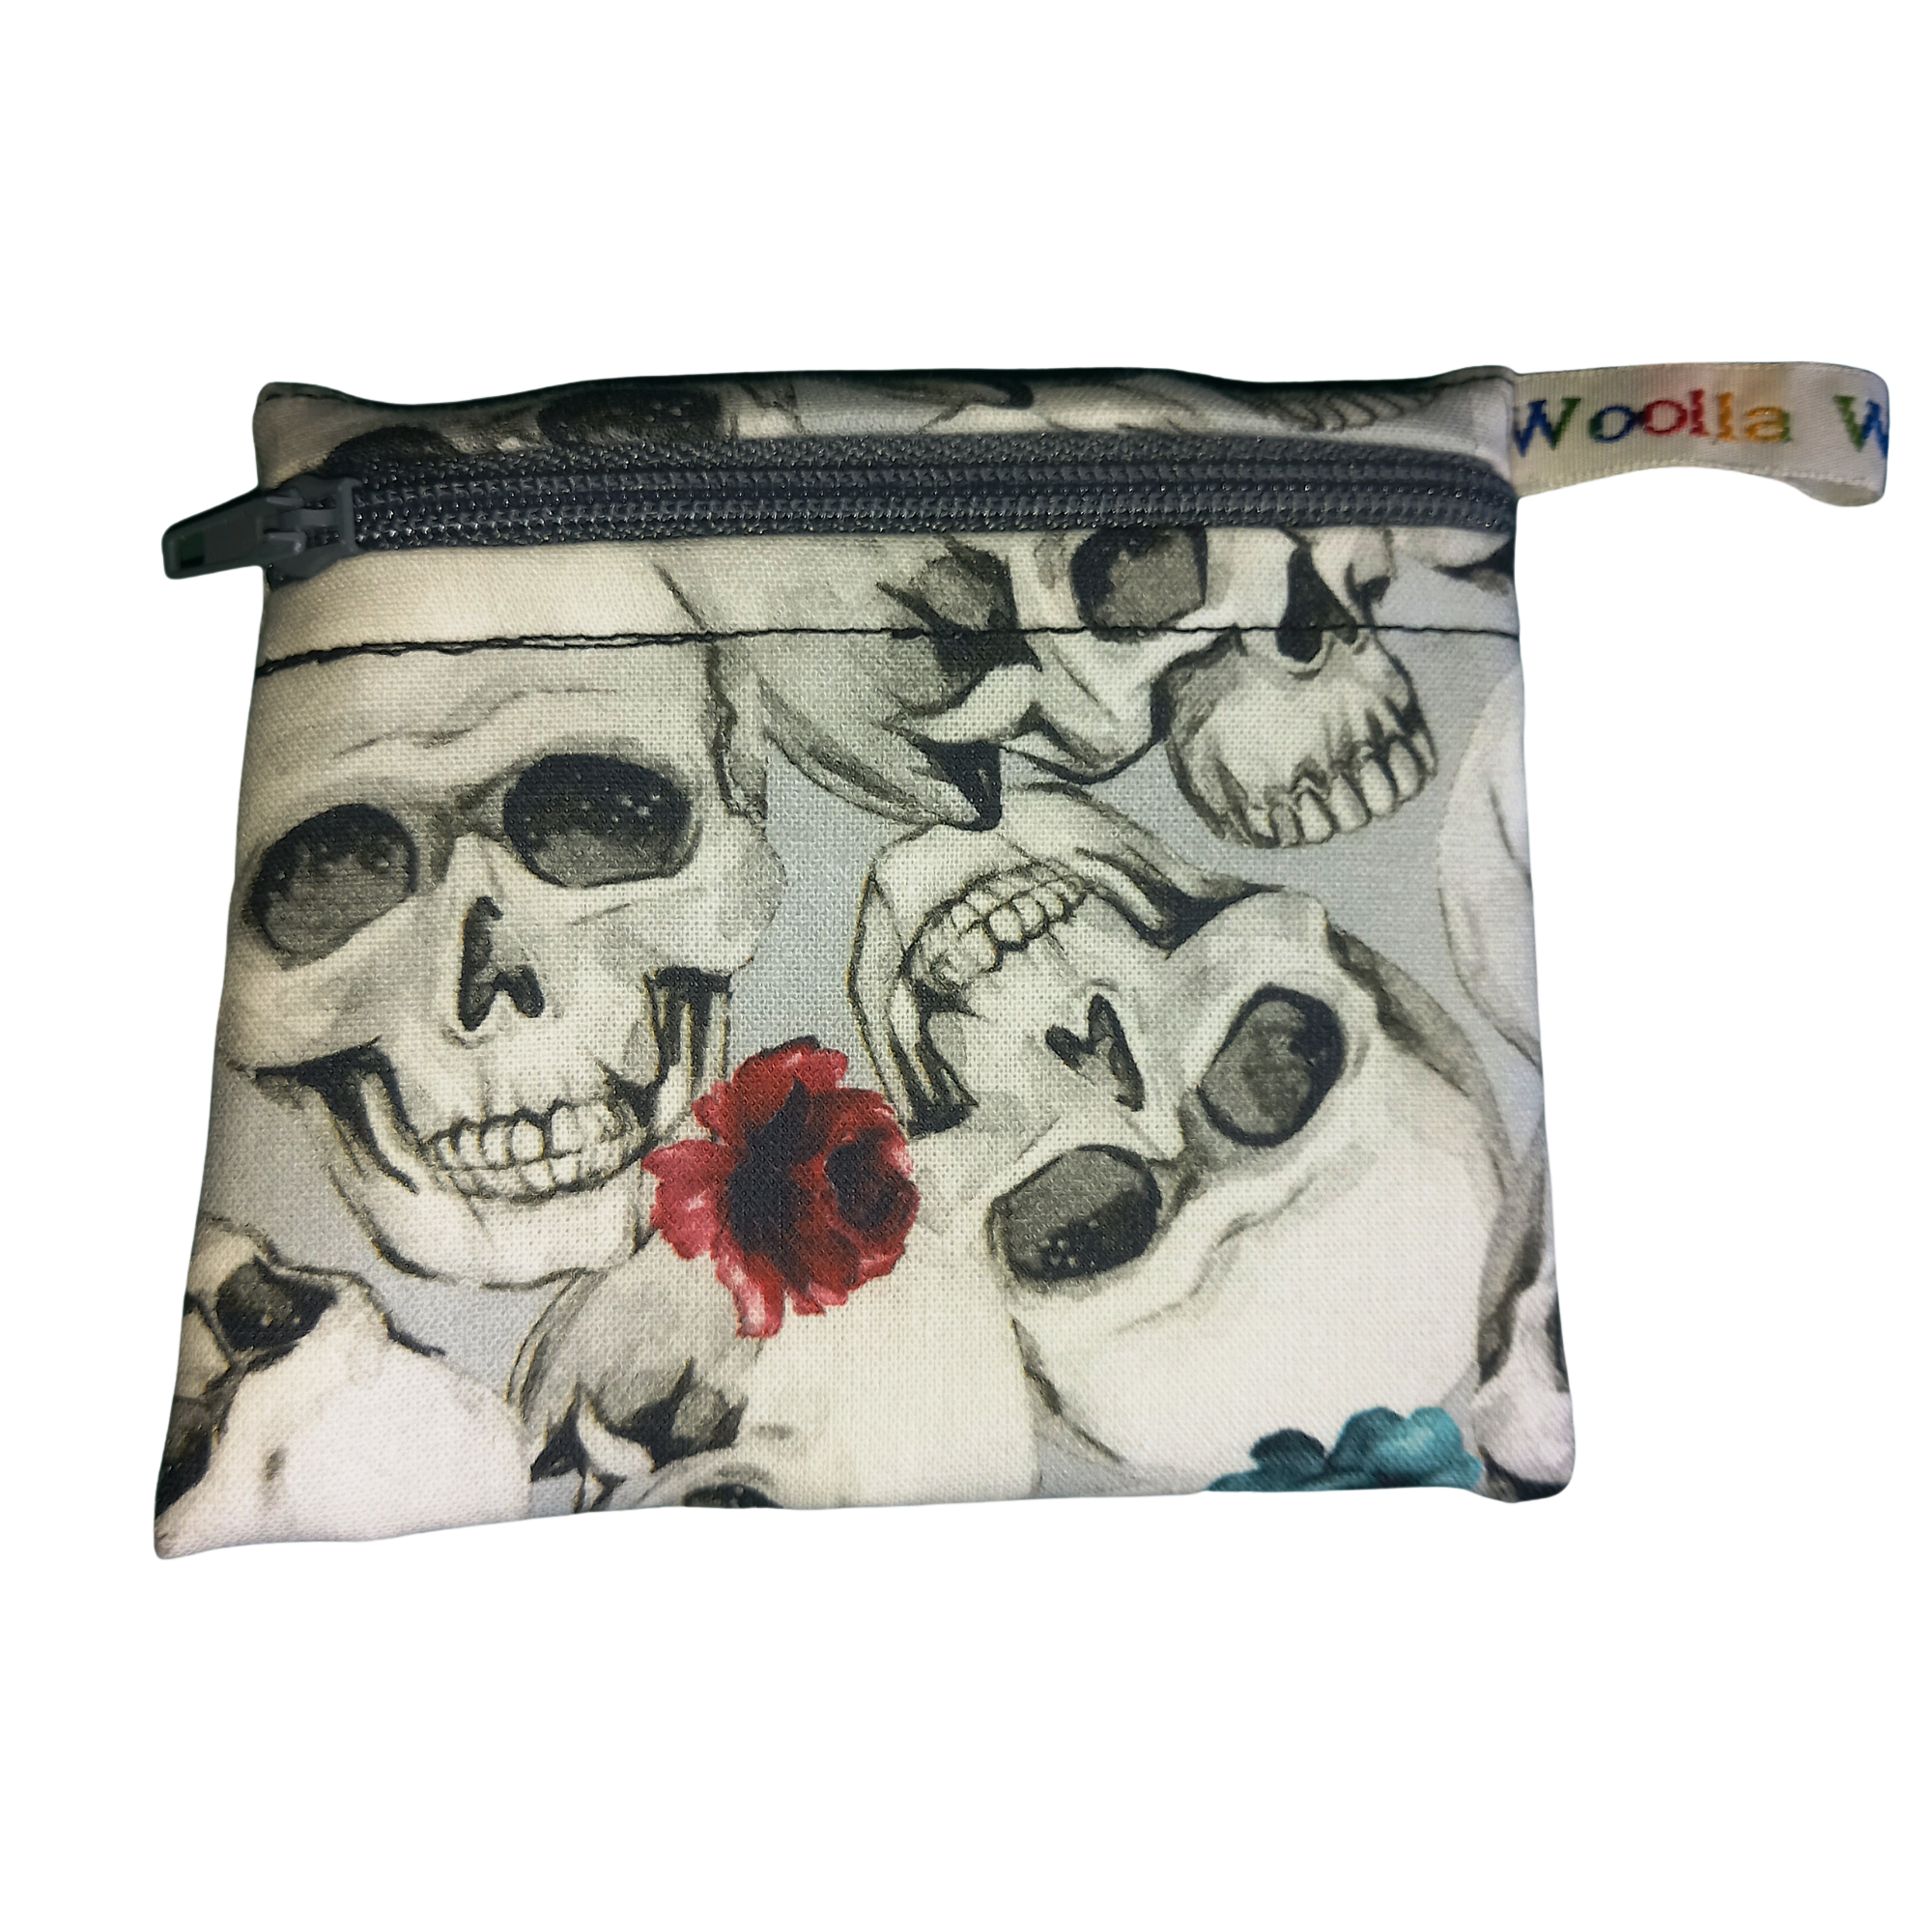 Grey Skull - Snack Bag - Small Pippins Waterproof Pouch for Food, Makeup and more, Eco-Friendly and Washable Lunch, Travel, and Storage